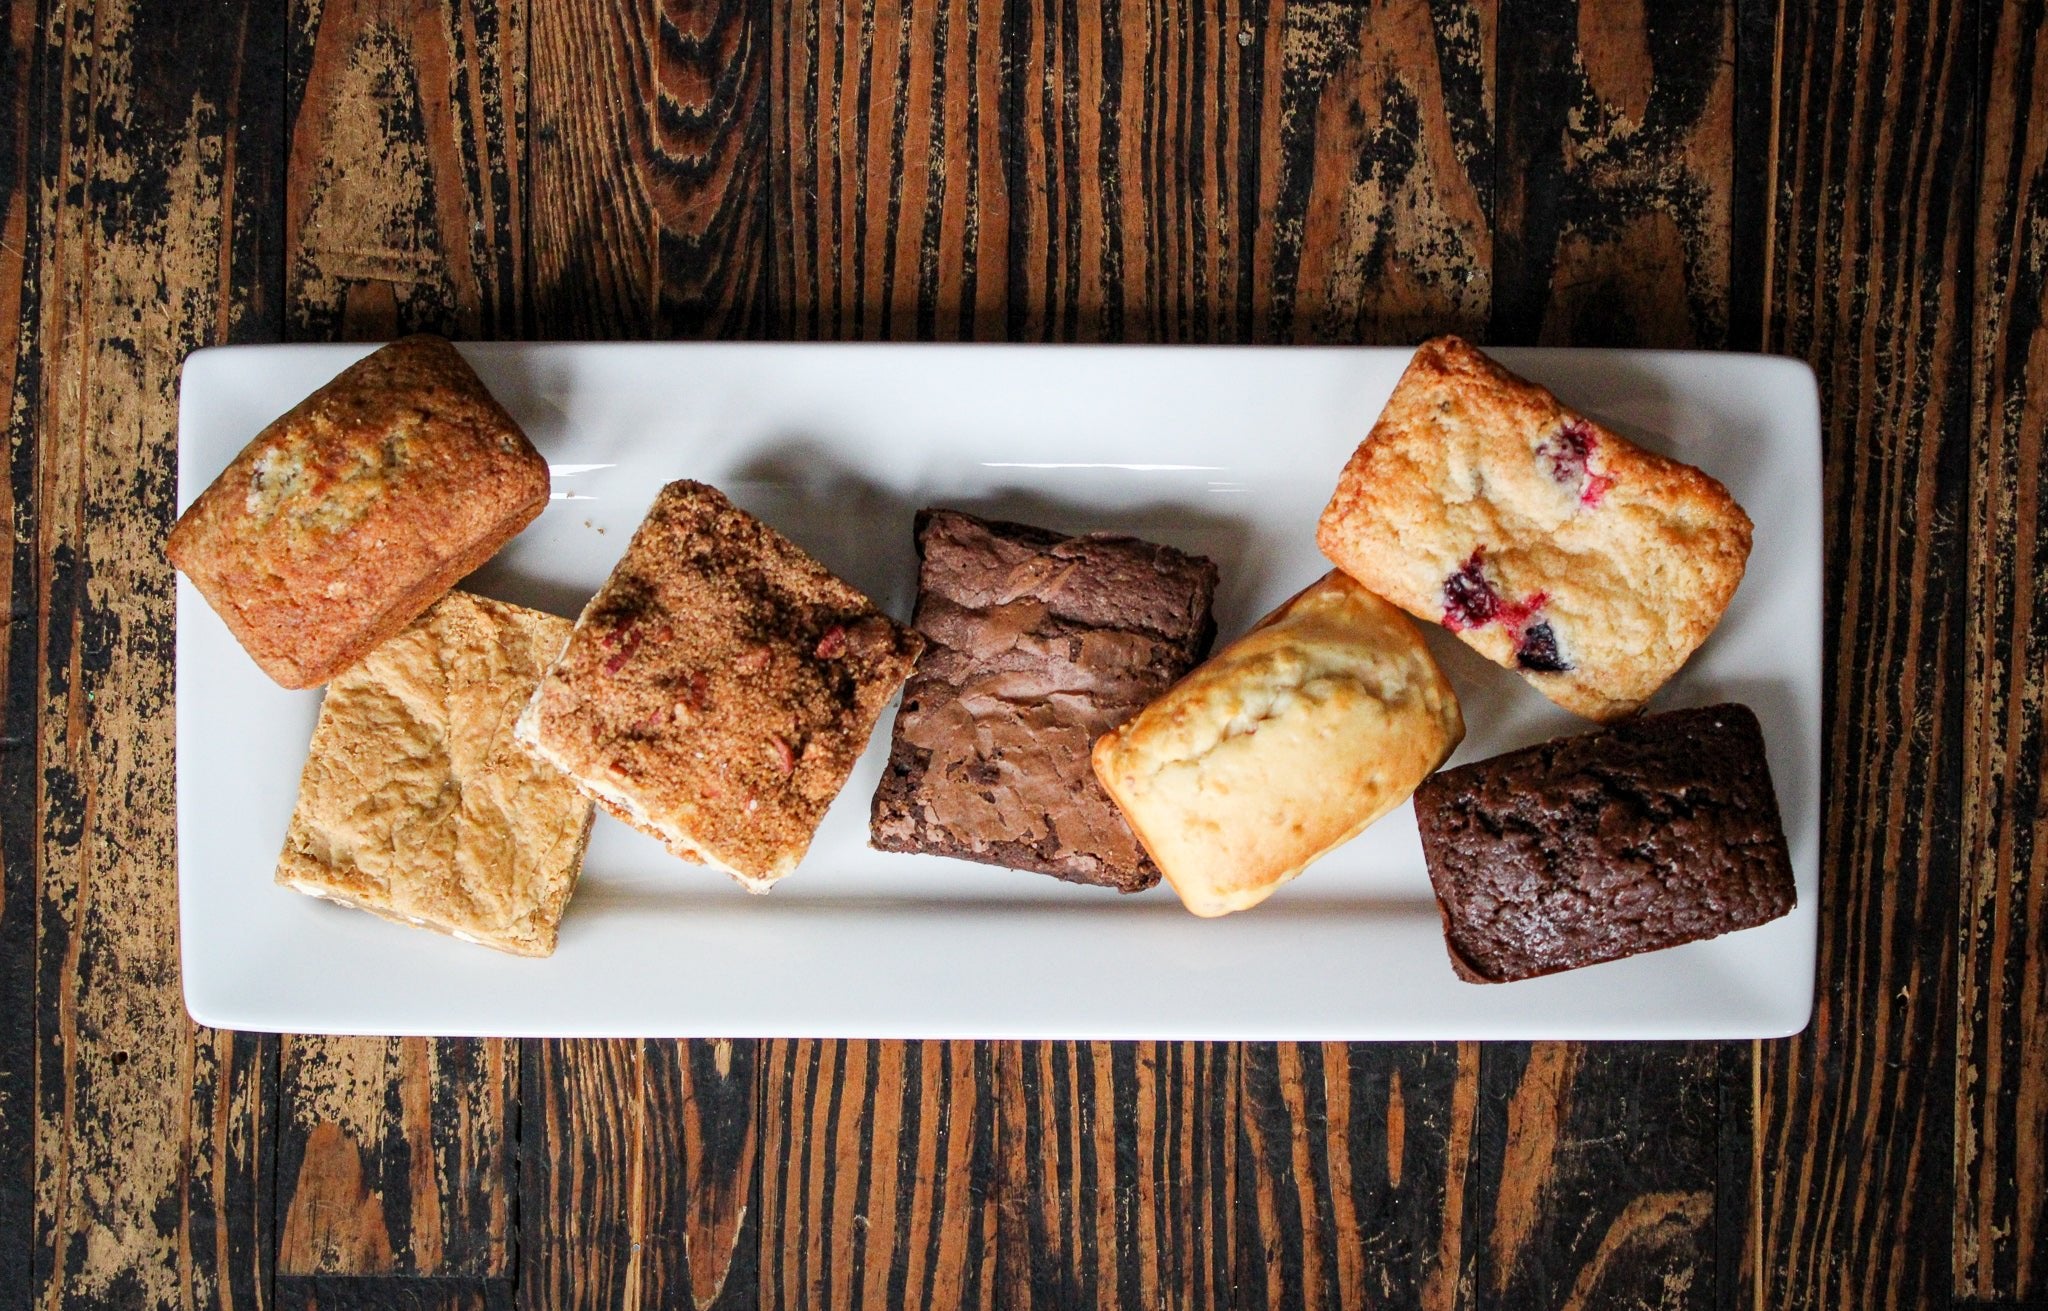 Baked Goods Gift Boxes - The Meeting Place on Market